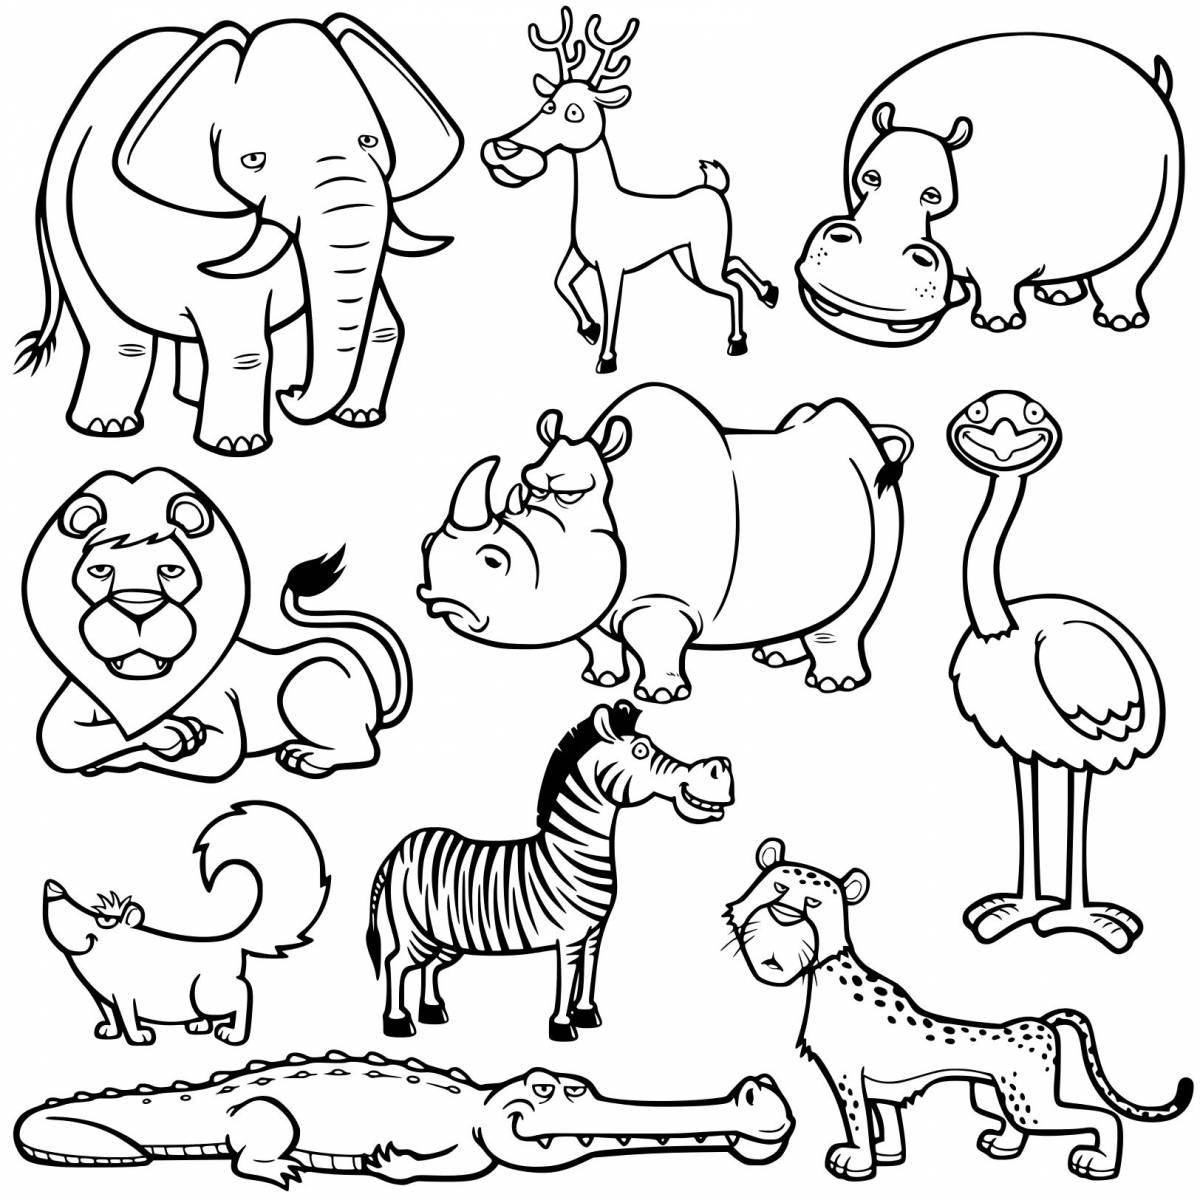 Adorable aardvark coloring page